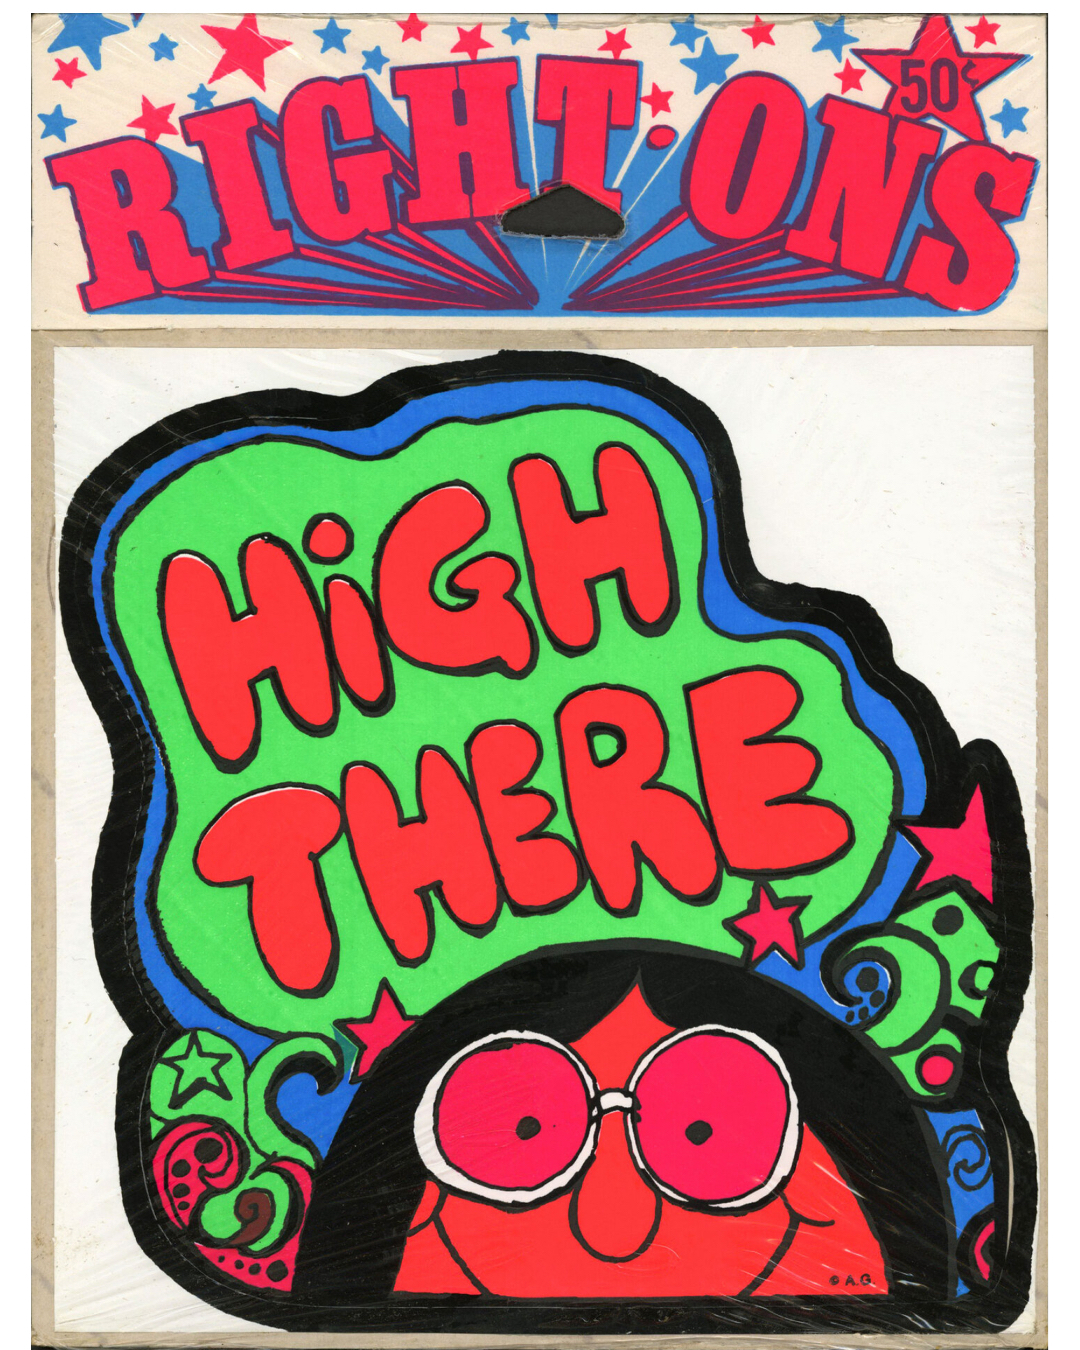 Right-Ons, 1971